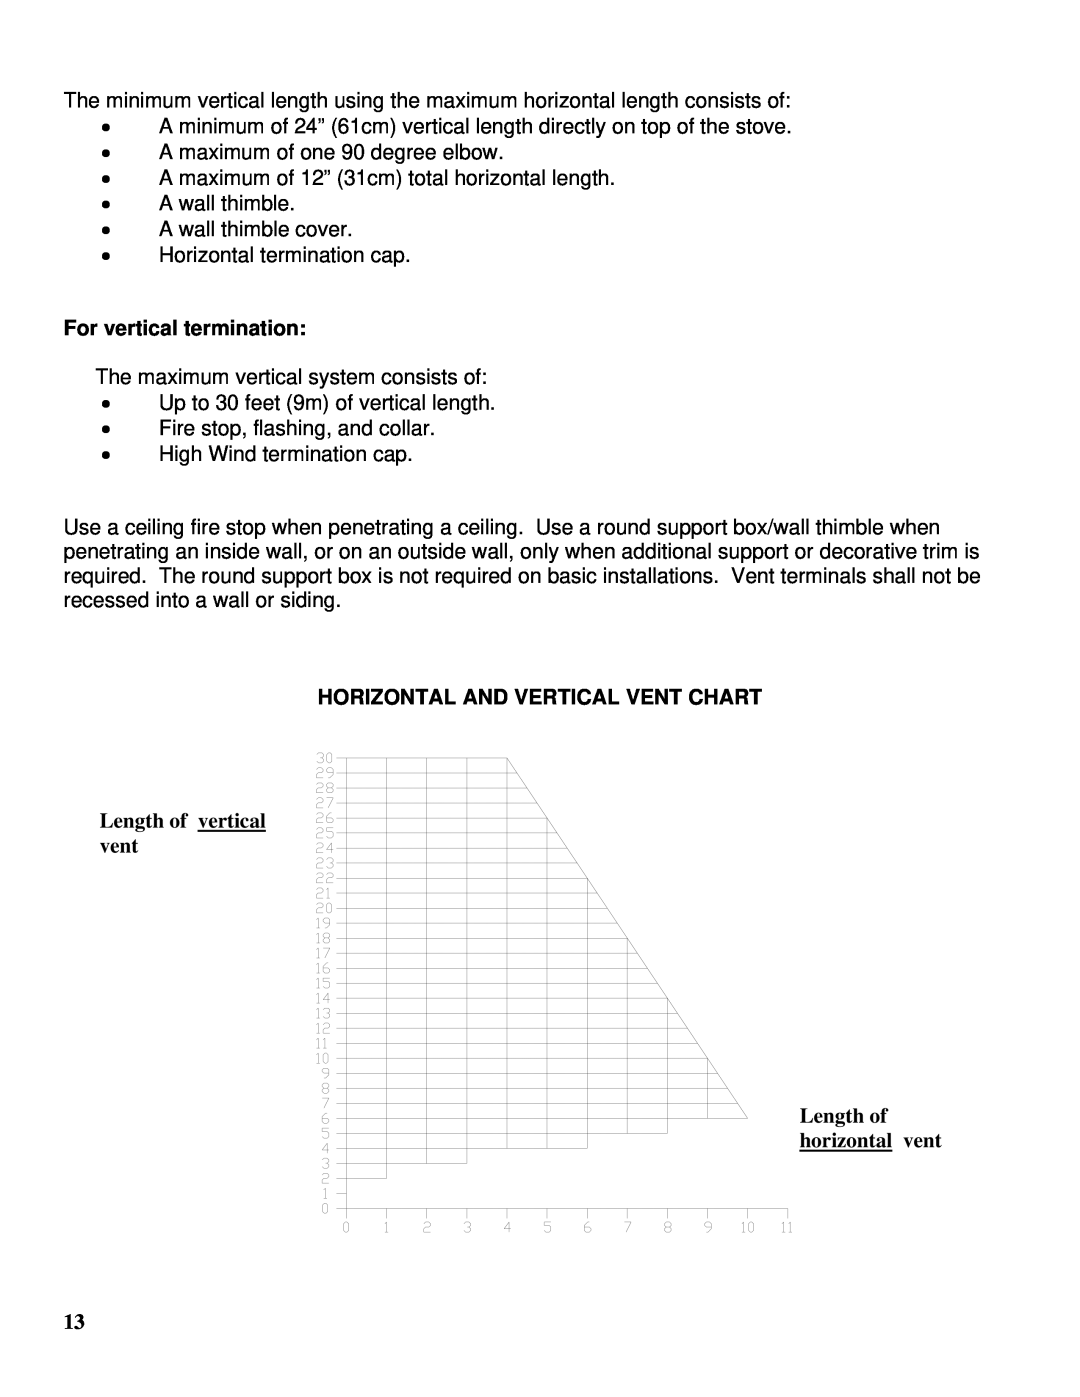 Drolet GTX-I manual For vertical termination, Horizontal And Vertical Vent Chart 